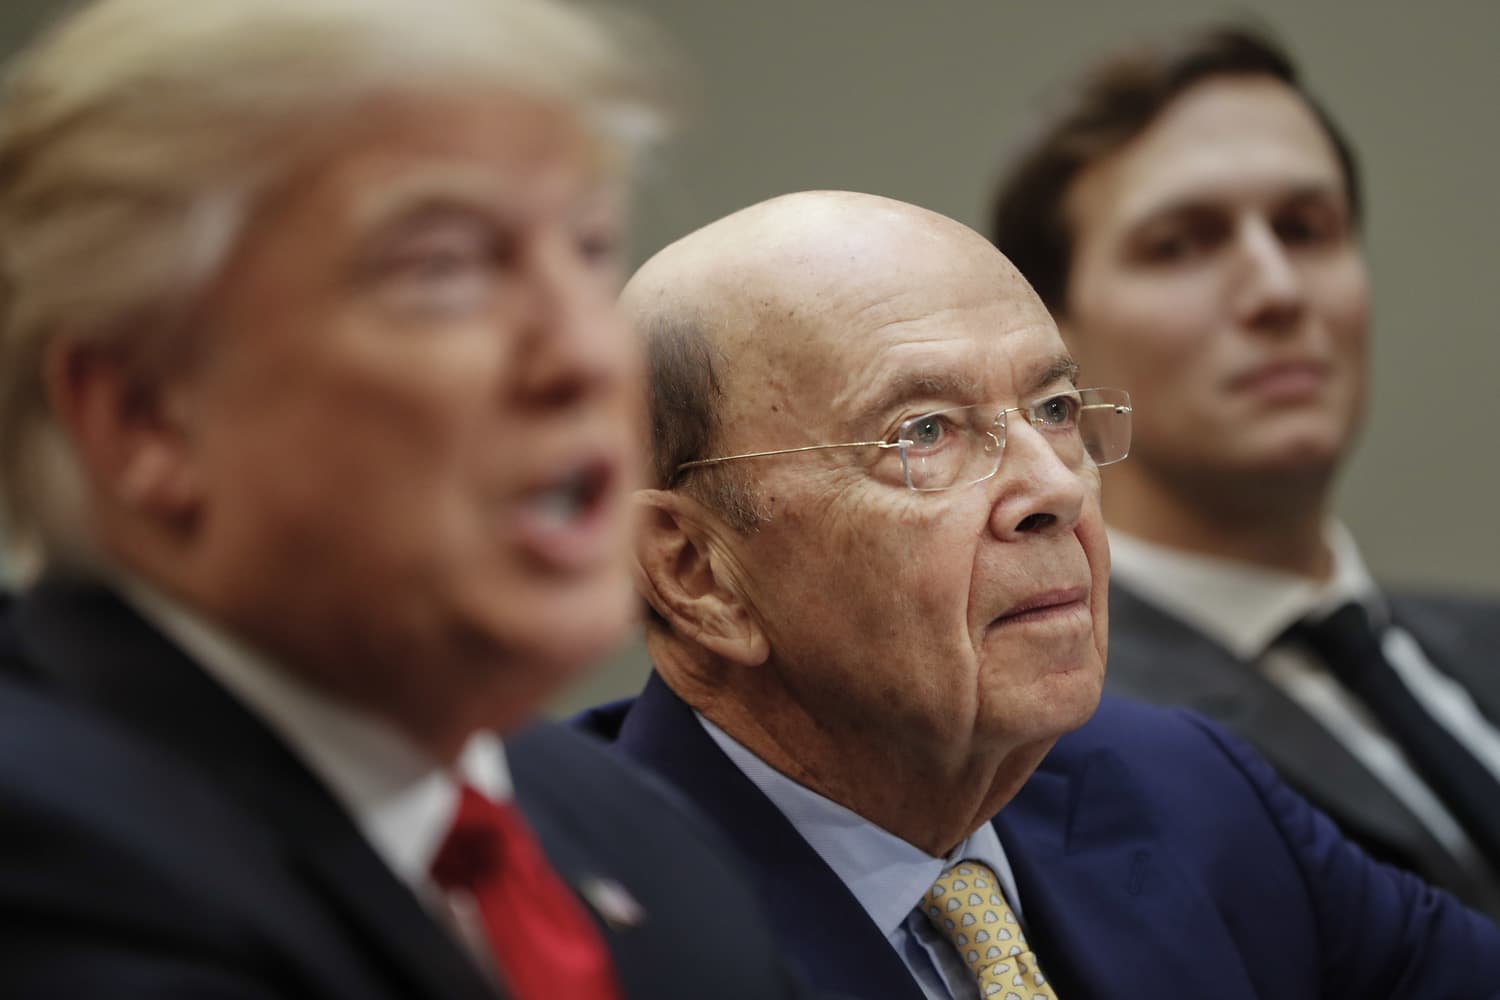 Commerce Secretary-designate Wilbur Ross, center, listens to President Donald Trump during a meeting with House and Senate legislators in the Roosevelt Room of the White House in Washington. (Pablo Martinez Monsivais/AP)